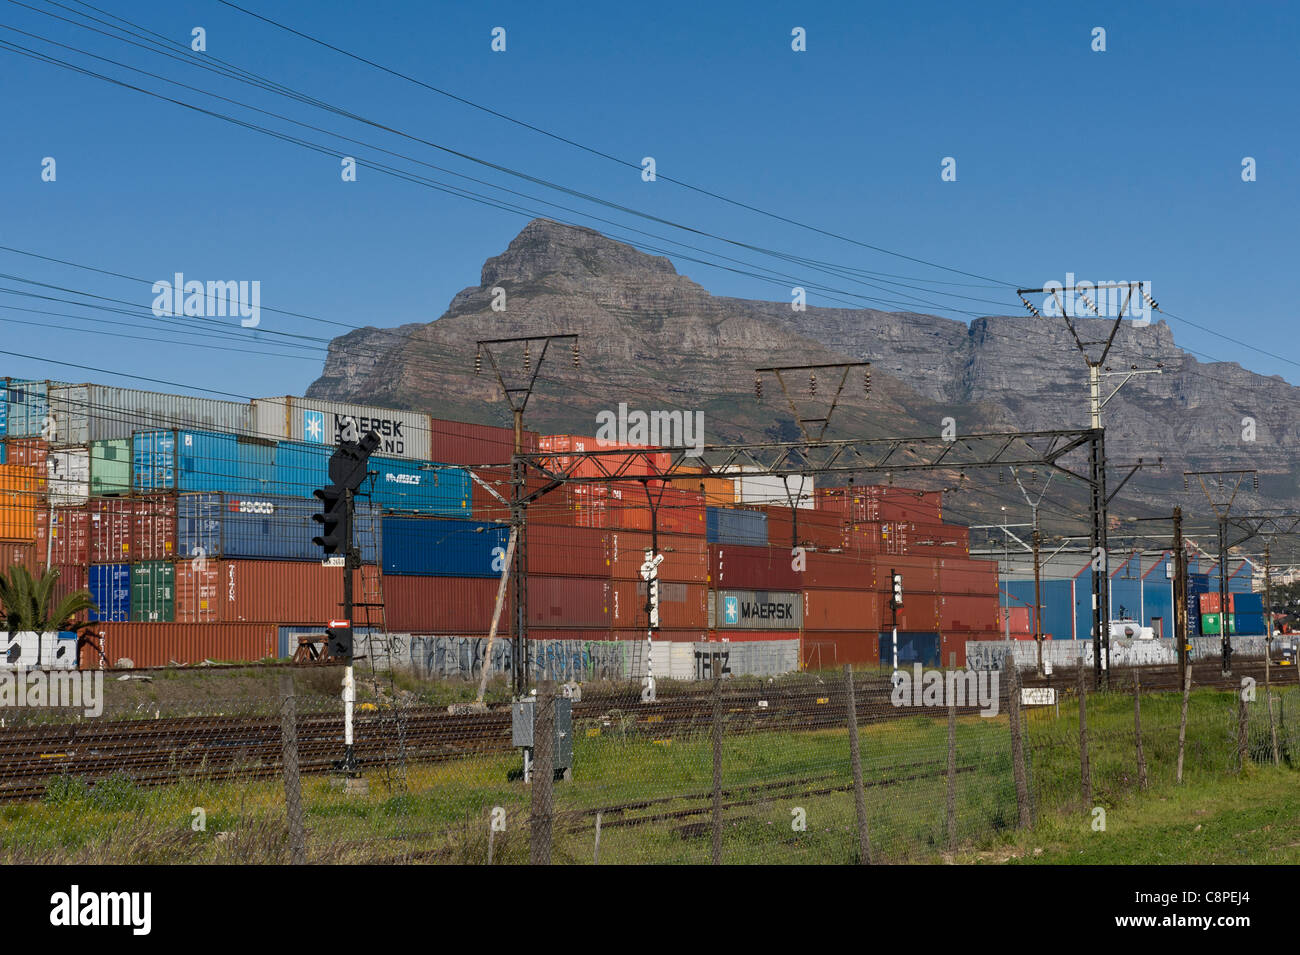 Containers and railway track Table Mountain in the background Cape Town South Africa Stock Photo